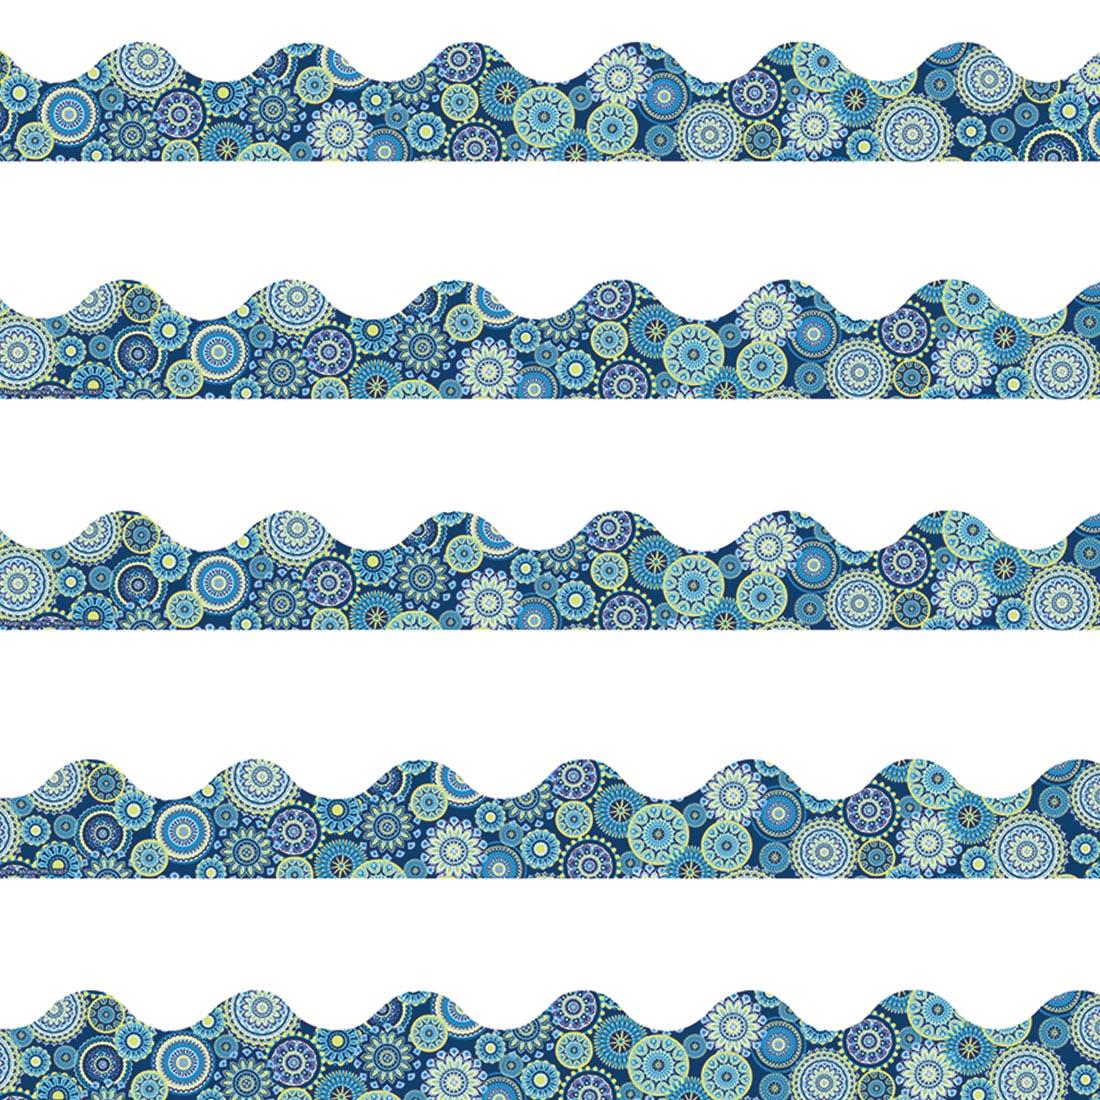 Mandala Extra Wide Deco Trim from the Blue Harmony collection by Eureka